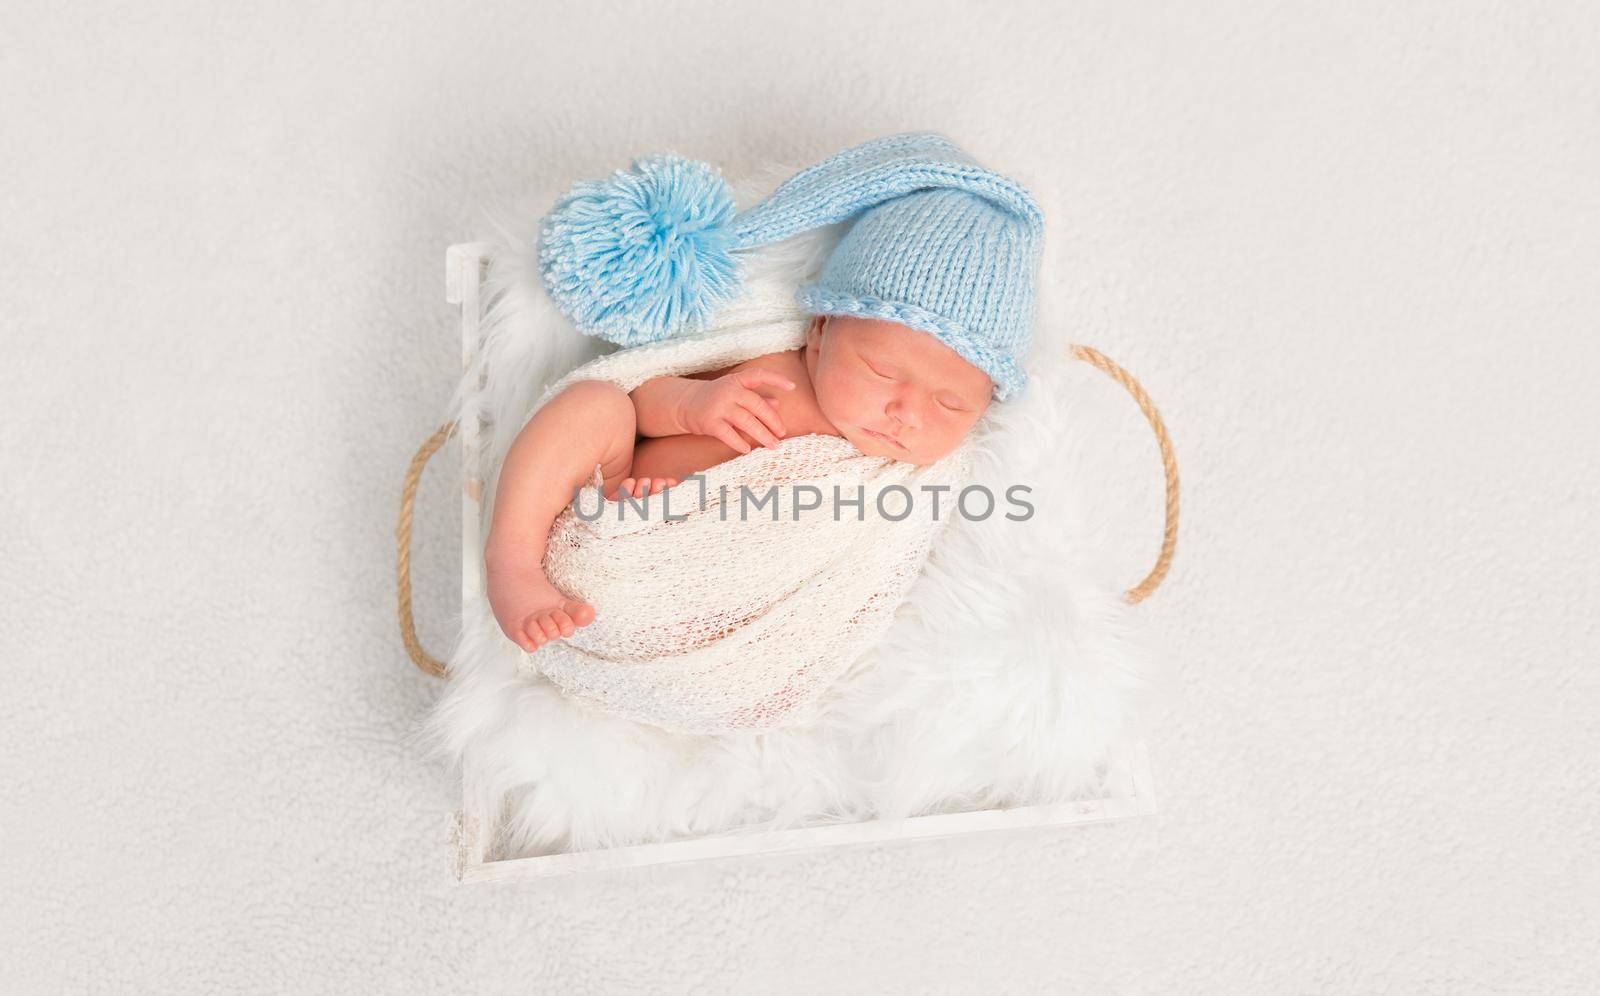 Sweet infant in a blue hat resting with his foot out of a covering blanket